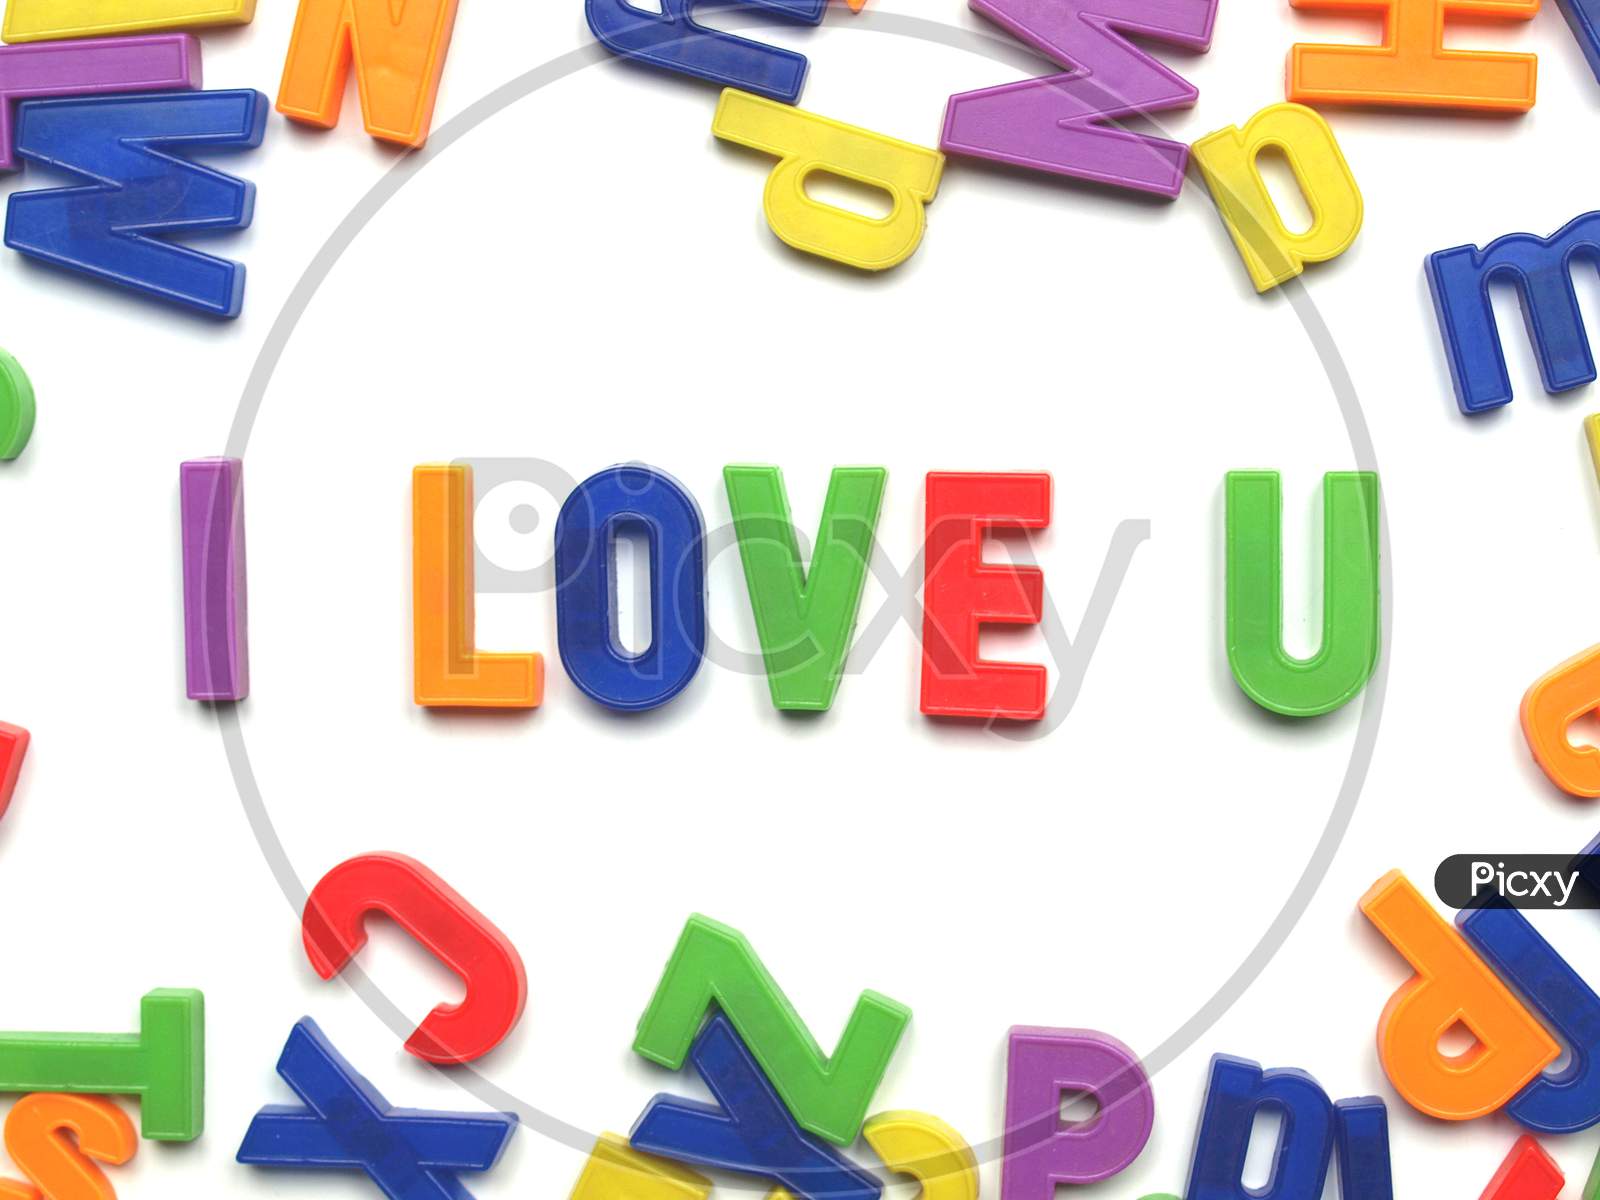 I Love You Message